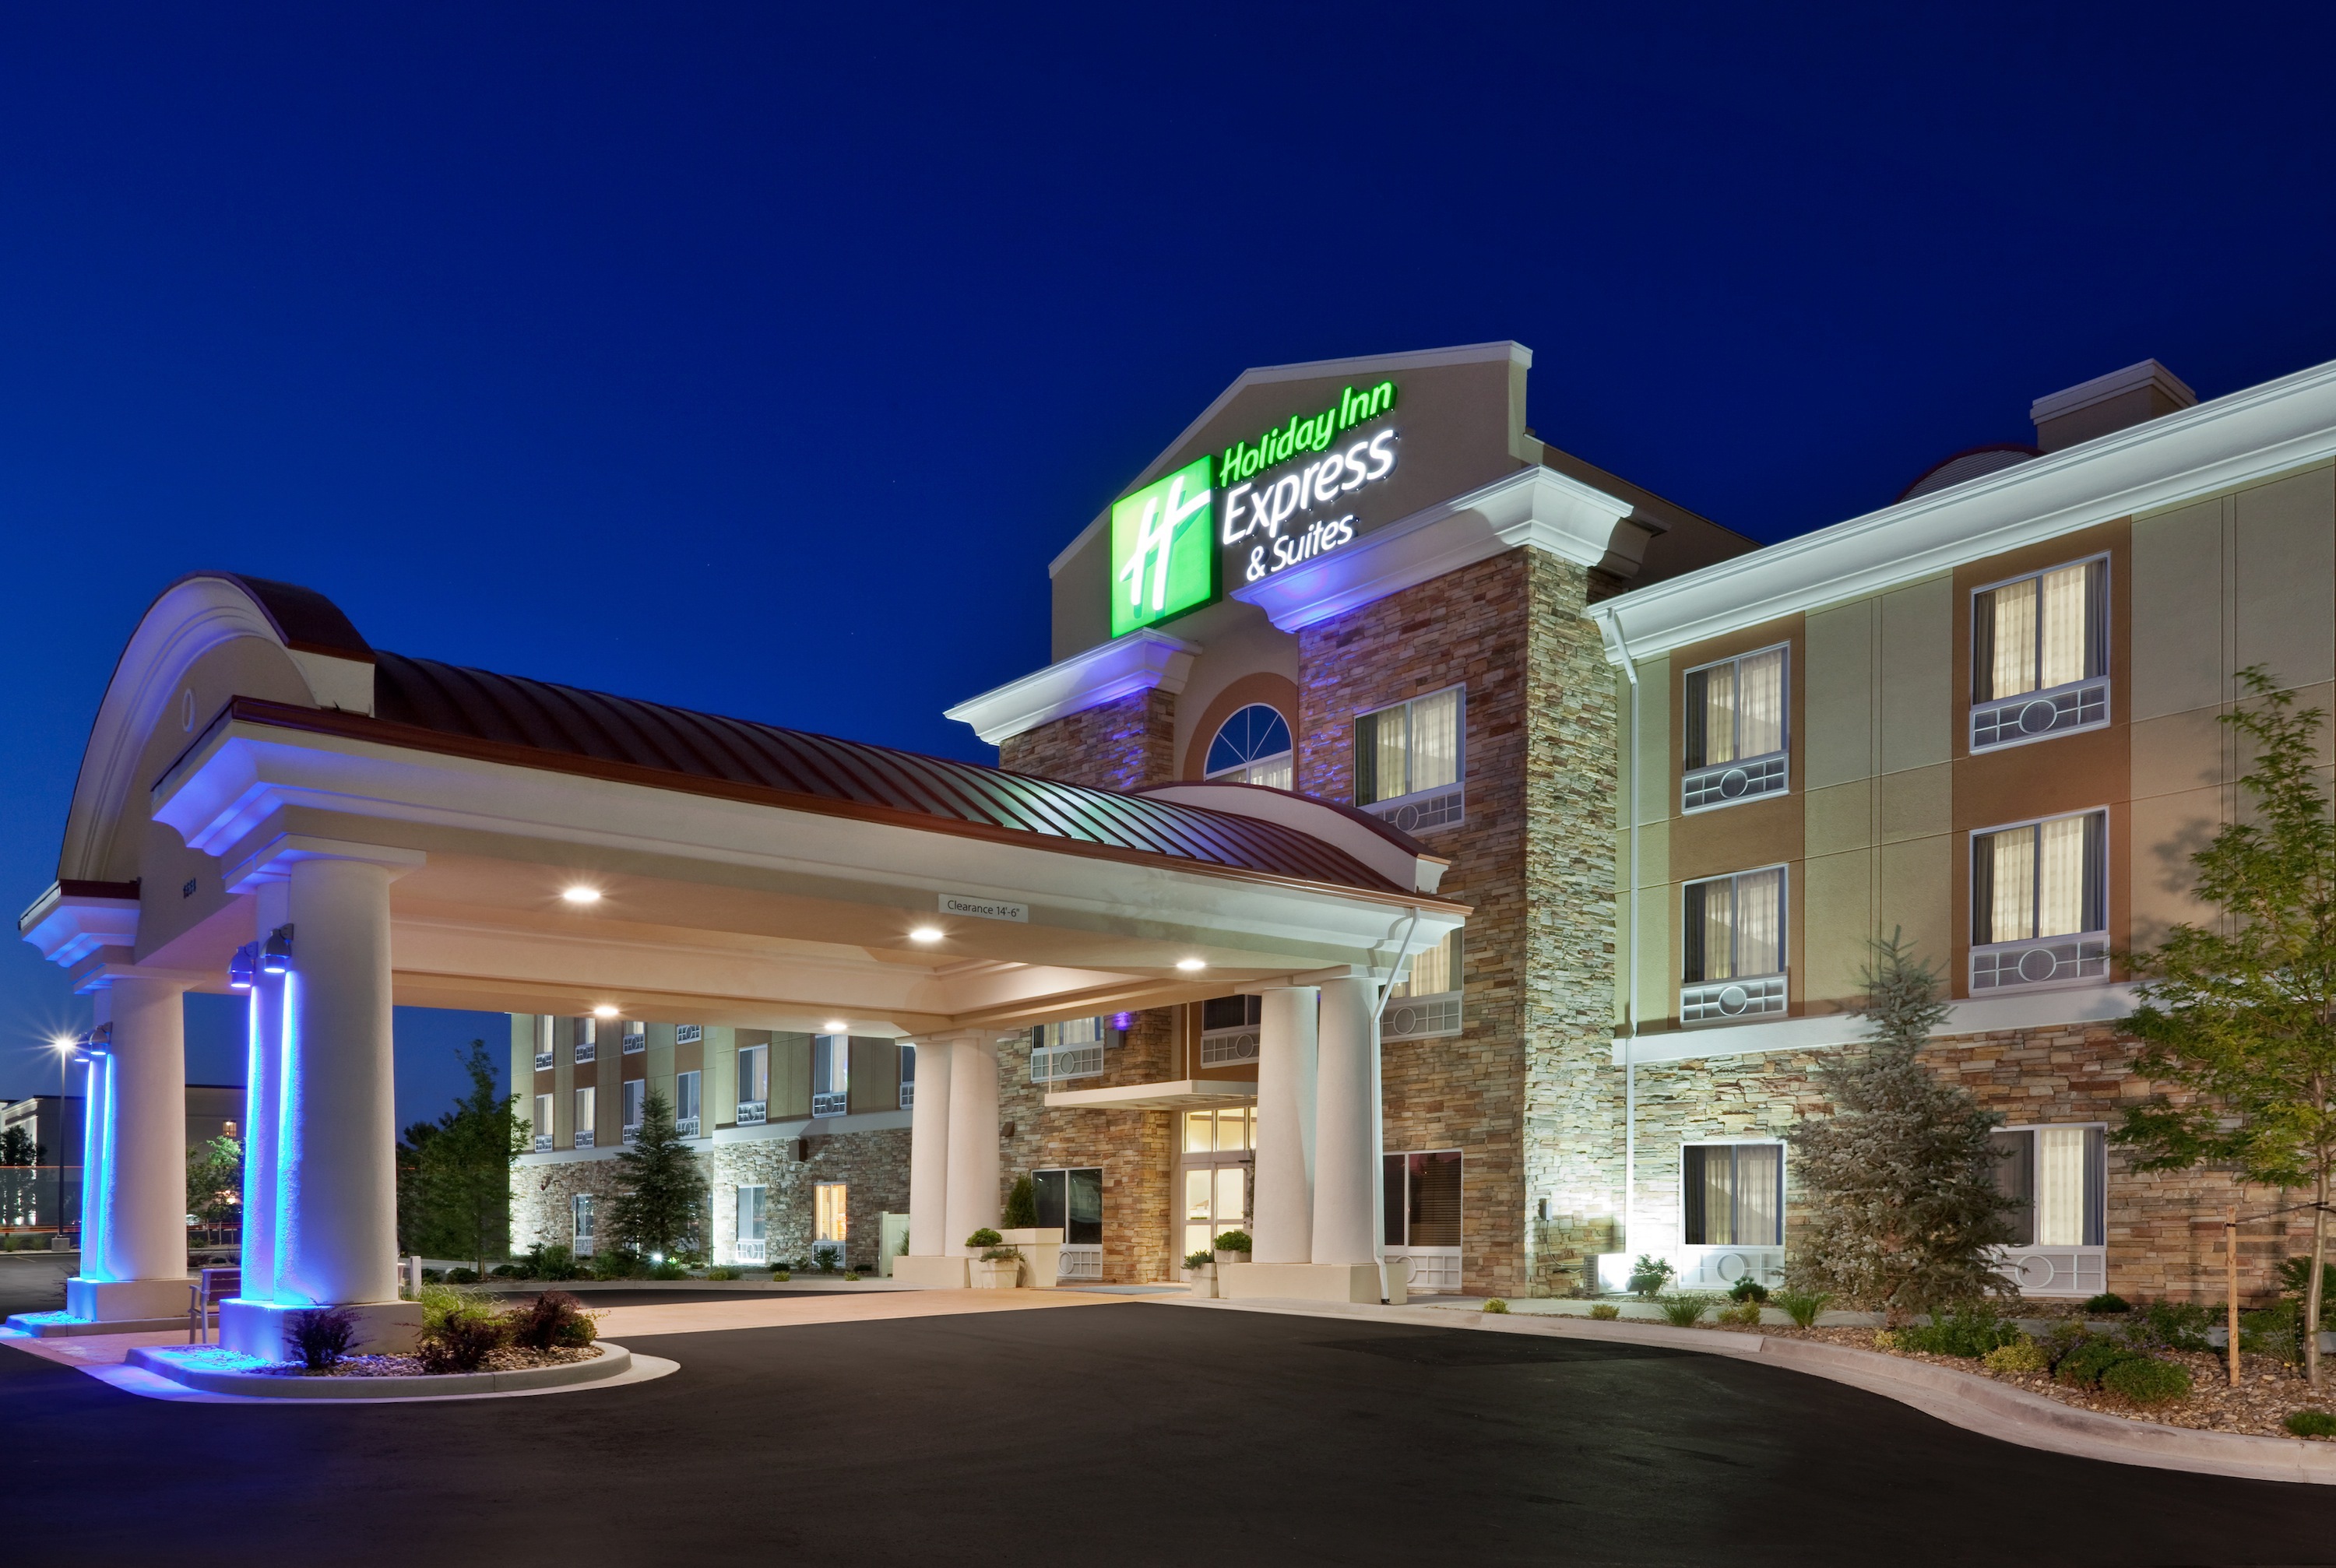 Photo of Holiday Inn Express & Suites Twin Falls, Twin Falls, ID